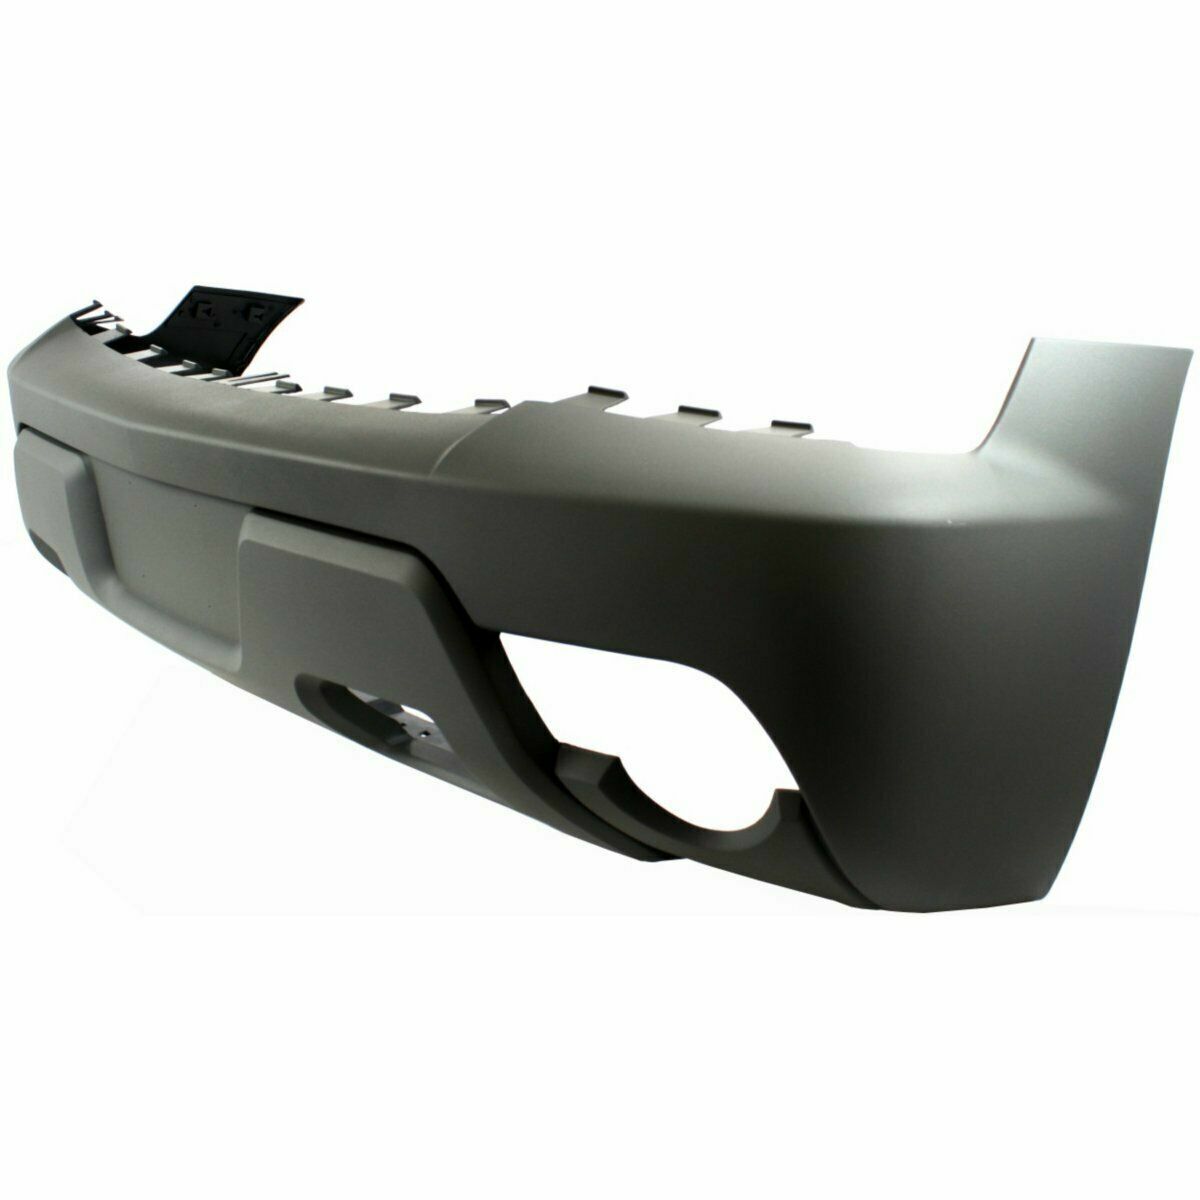 2002-2002 CHEVY AVALANCHE; Front Bumper Cover; 1500 series Painted to Match